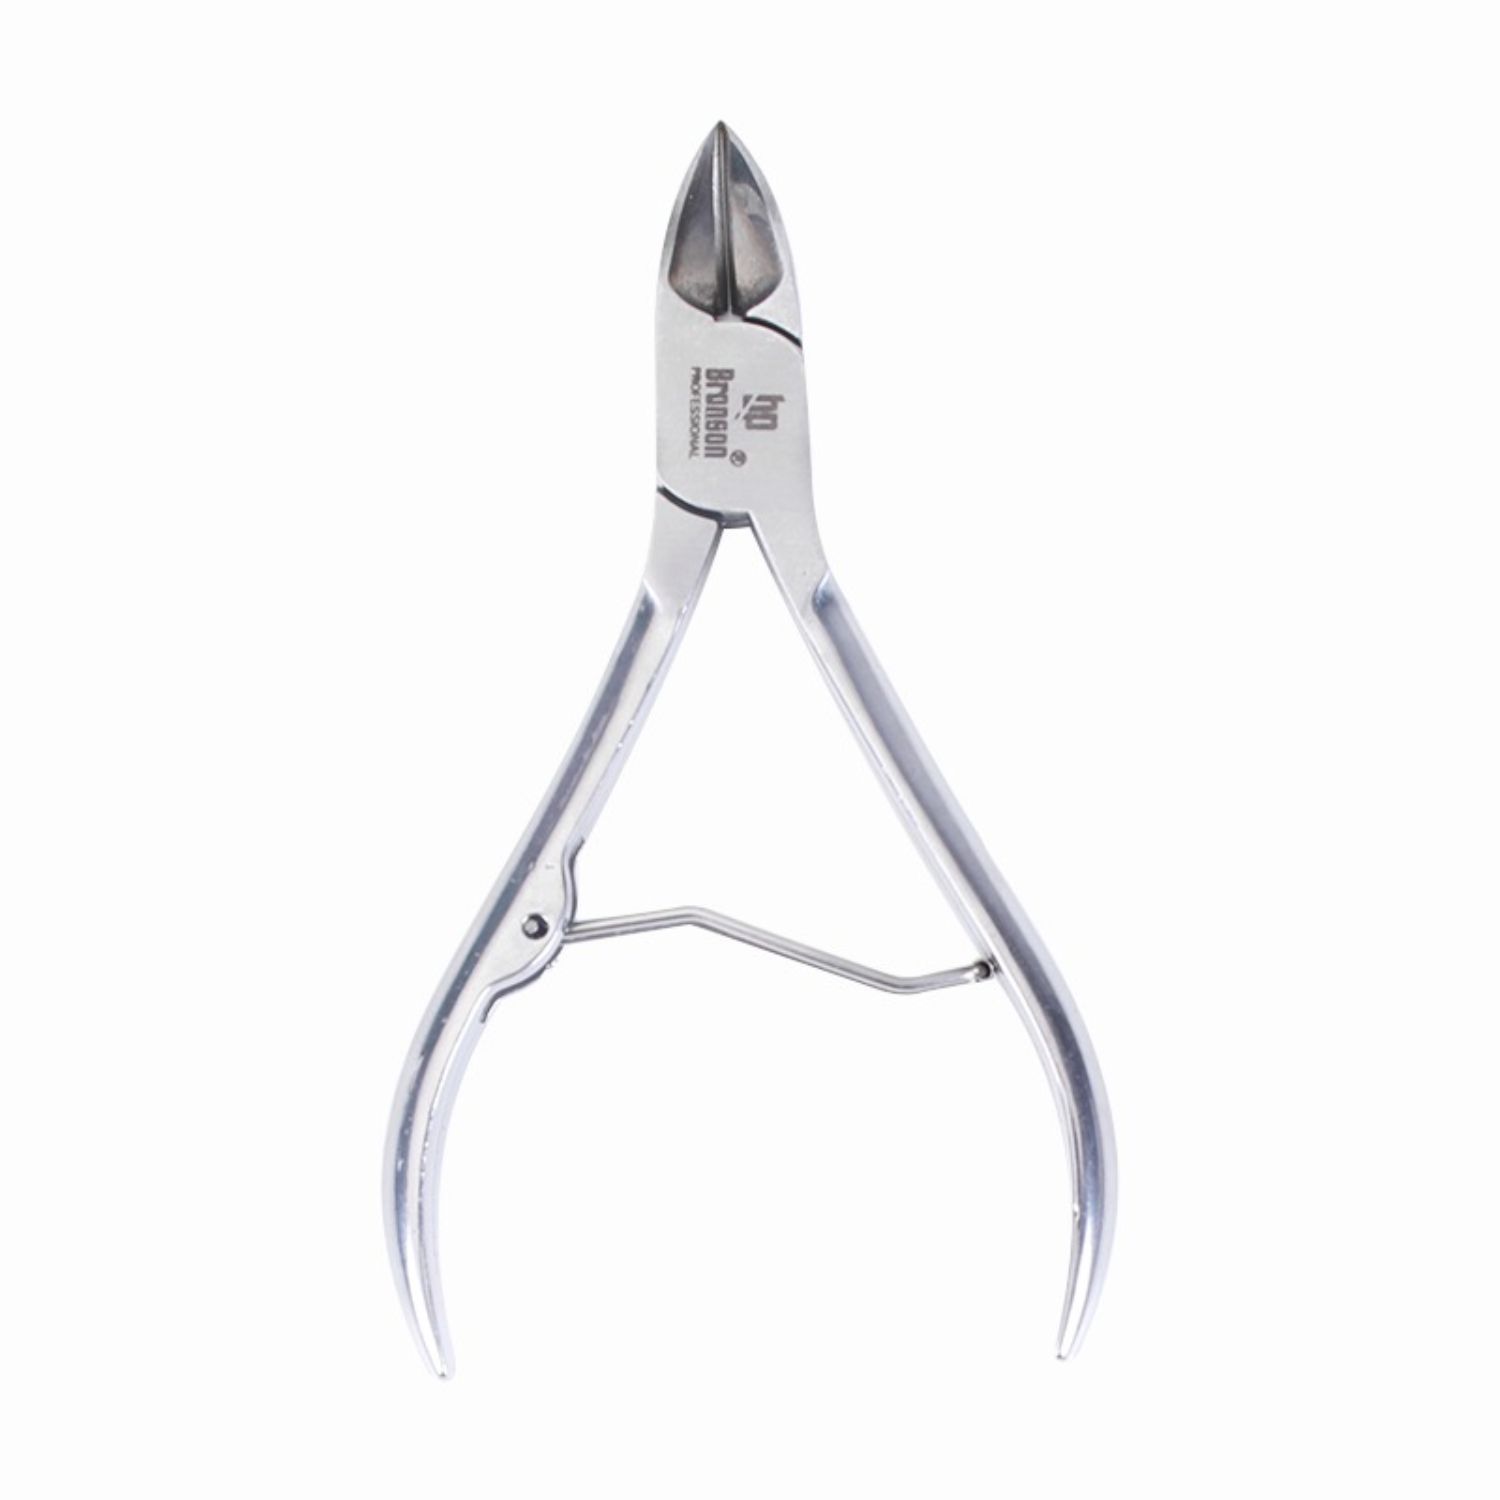 Nail Nippers: Miltex Double Action Nail Nippers